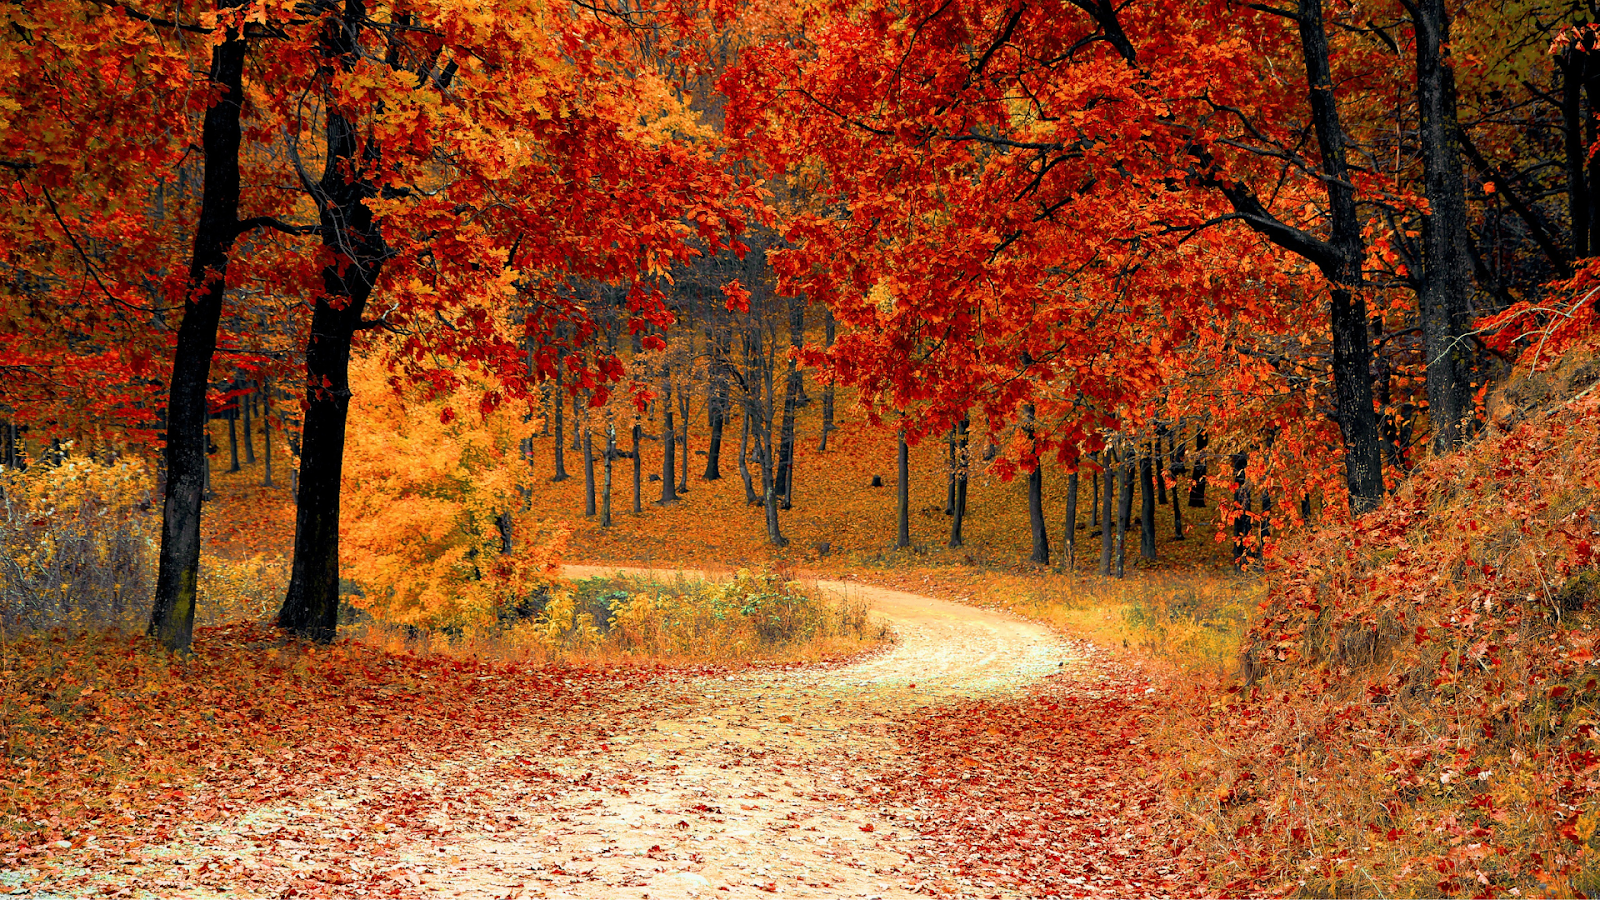 A path leading into trees during autumn